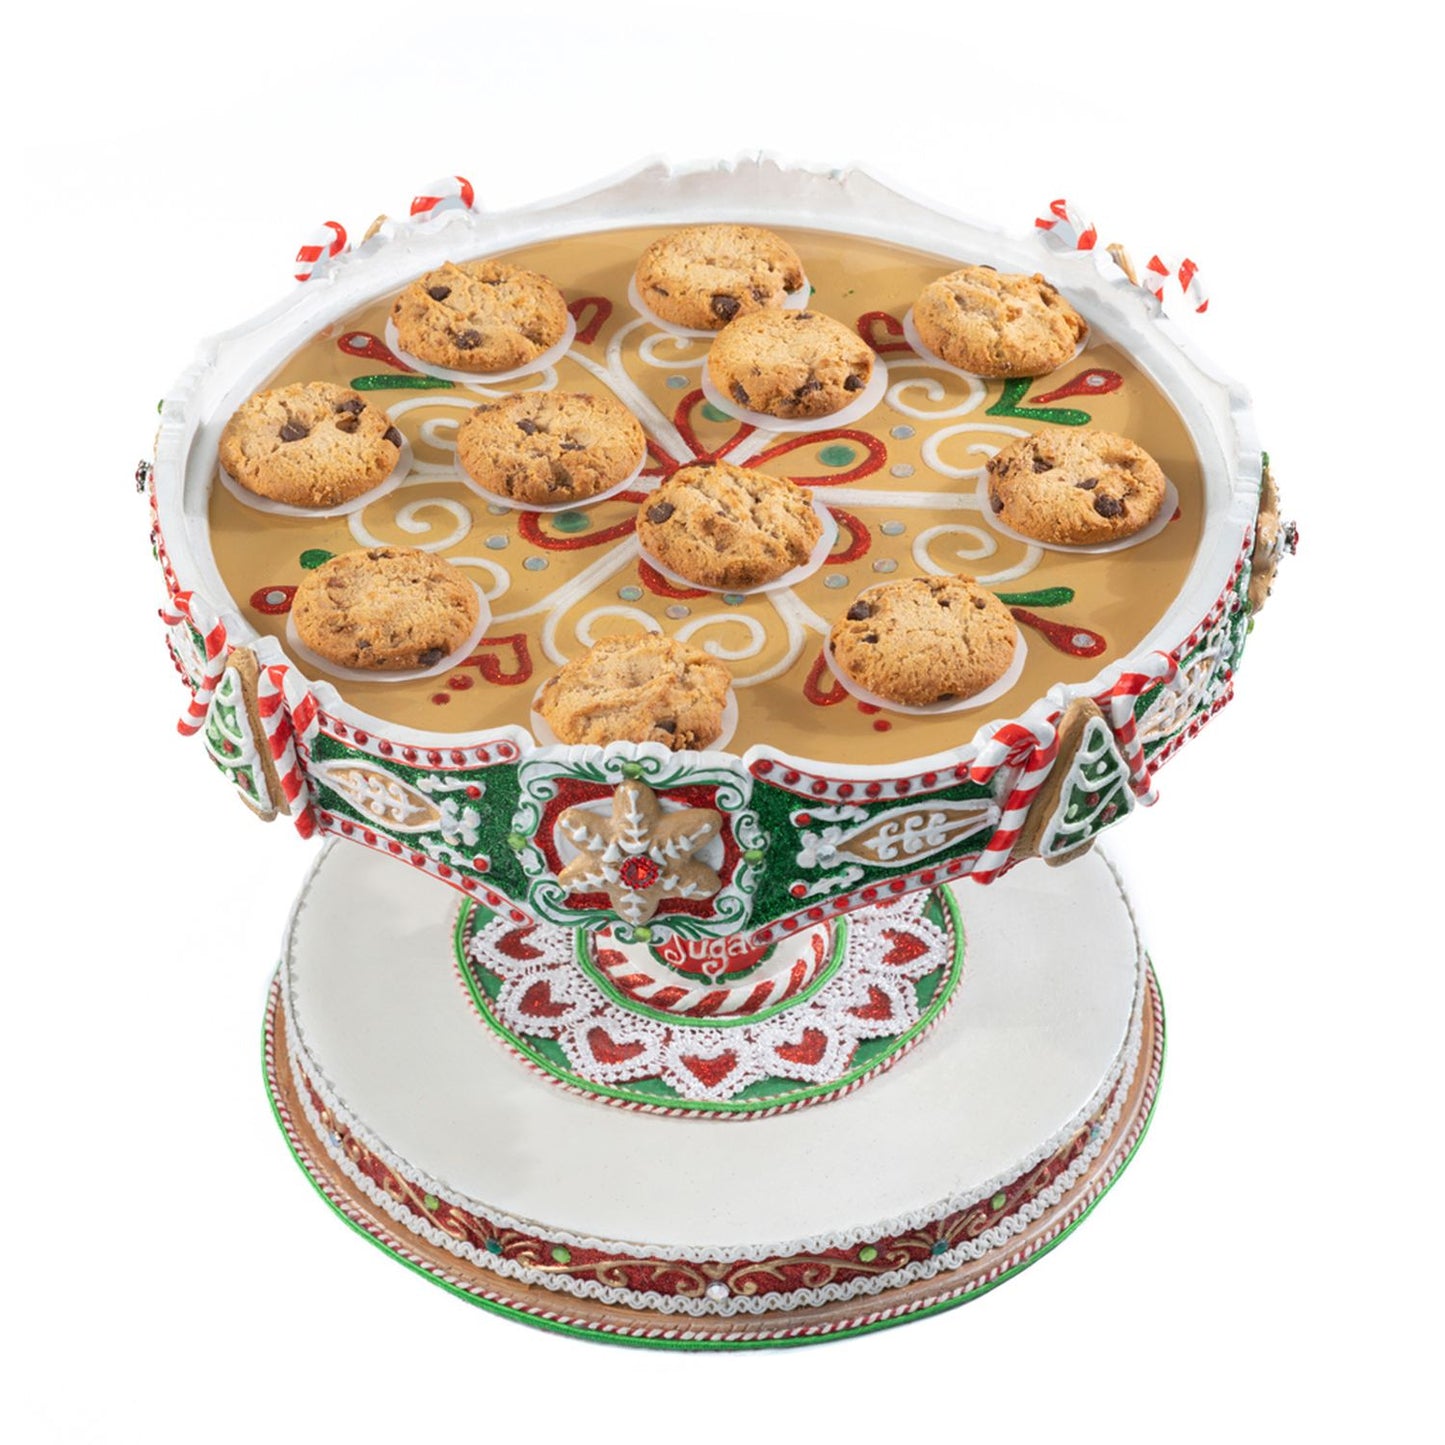 Katherine's Collection Seasoned Greetings Cake Stand, 12x12x8.5 Inches, Green Resin